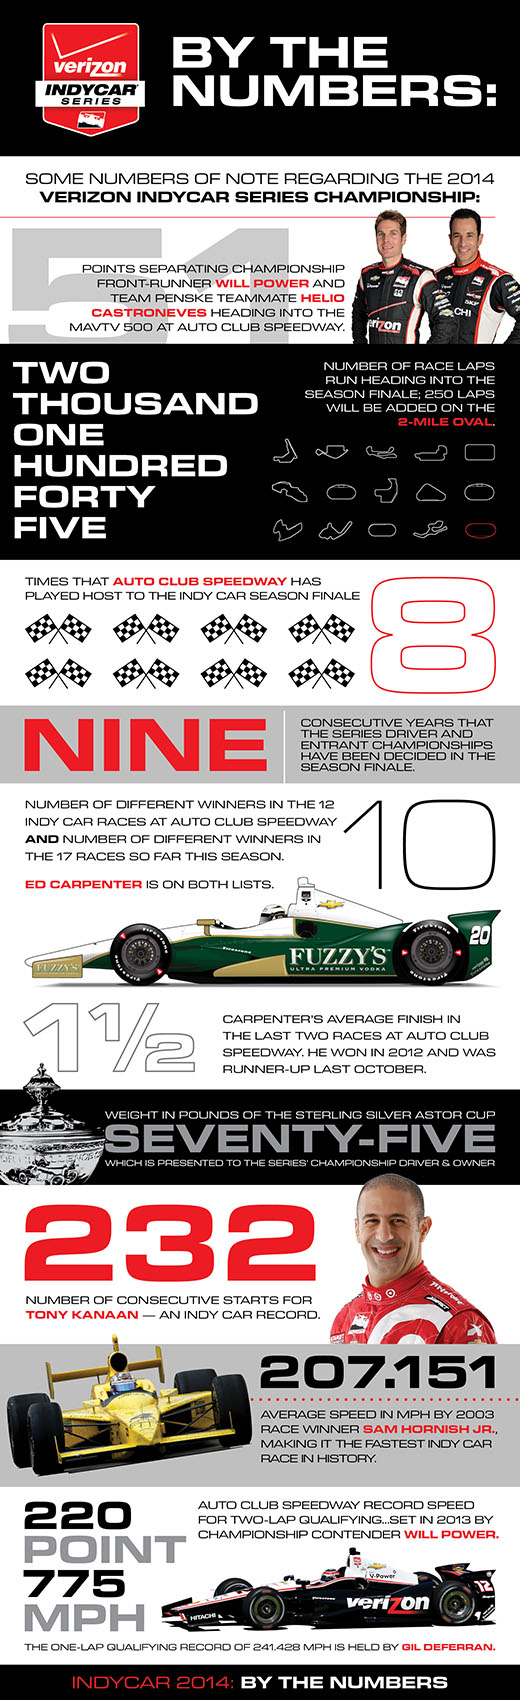 2014 Championship By The Numbers Infographic